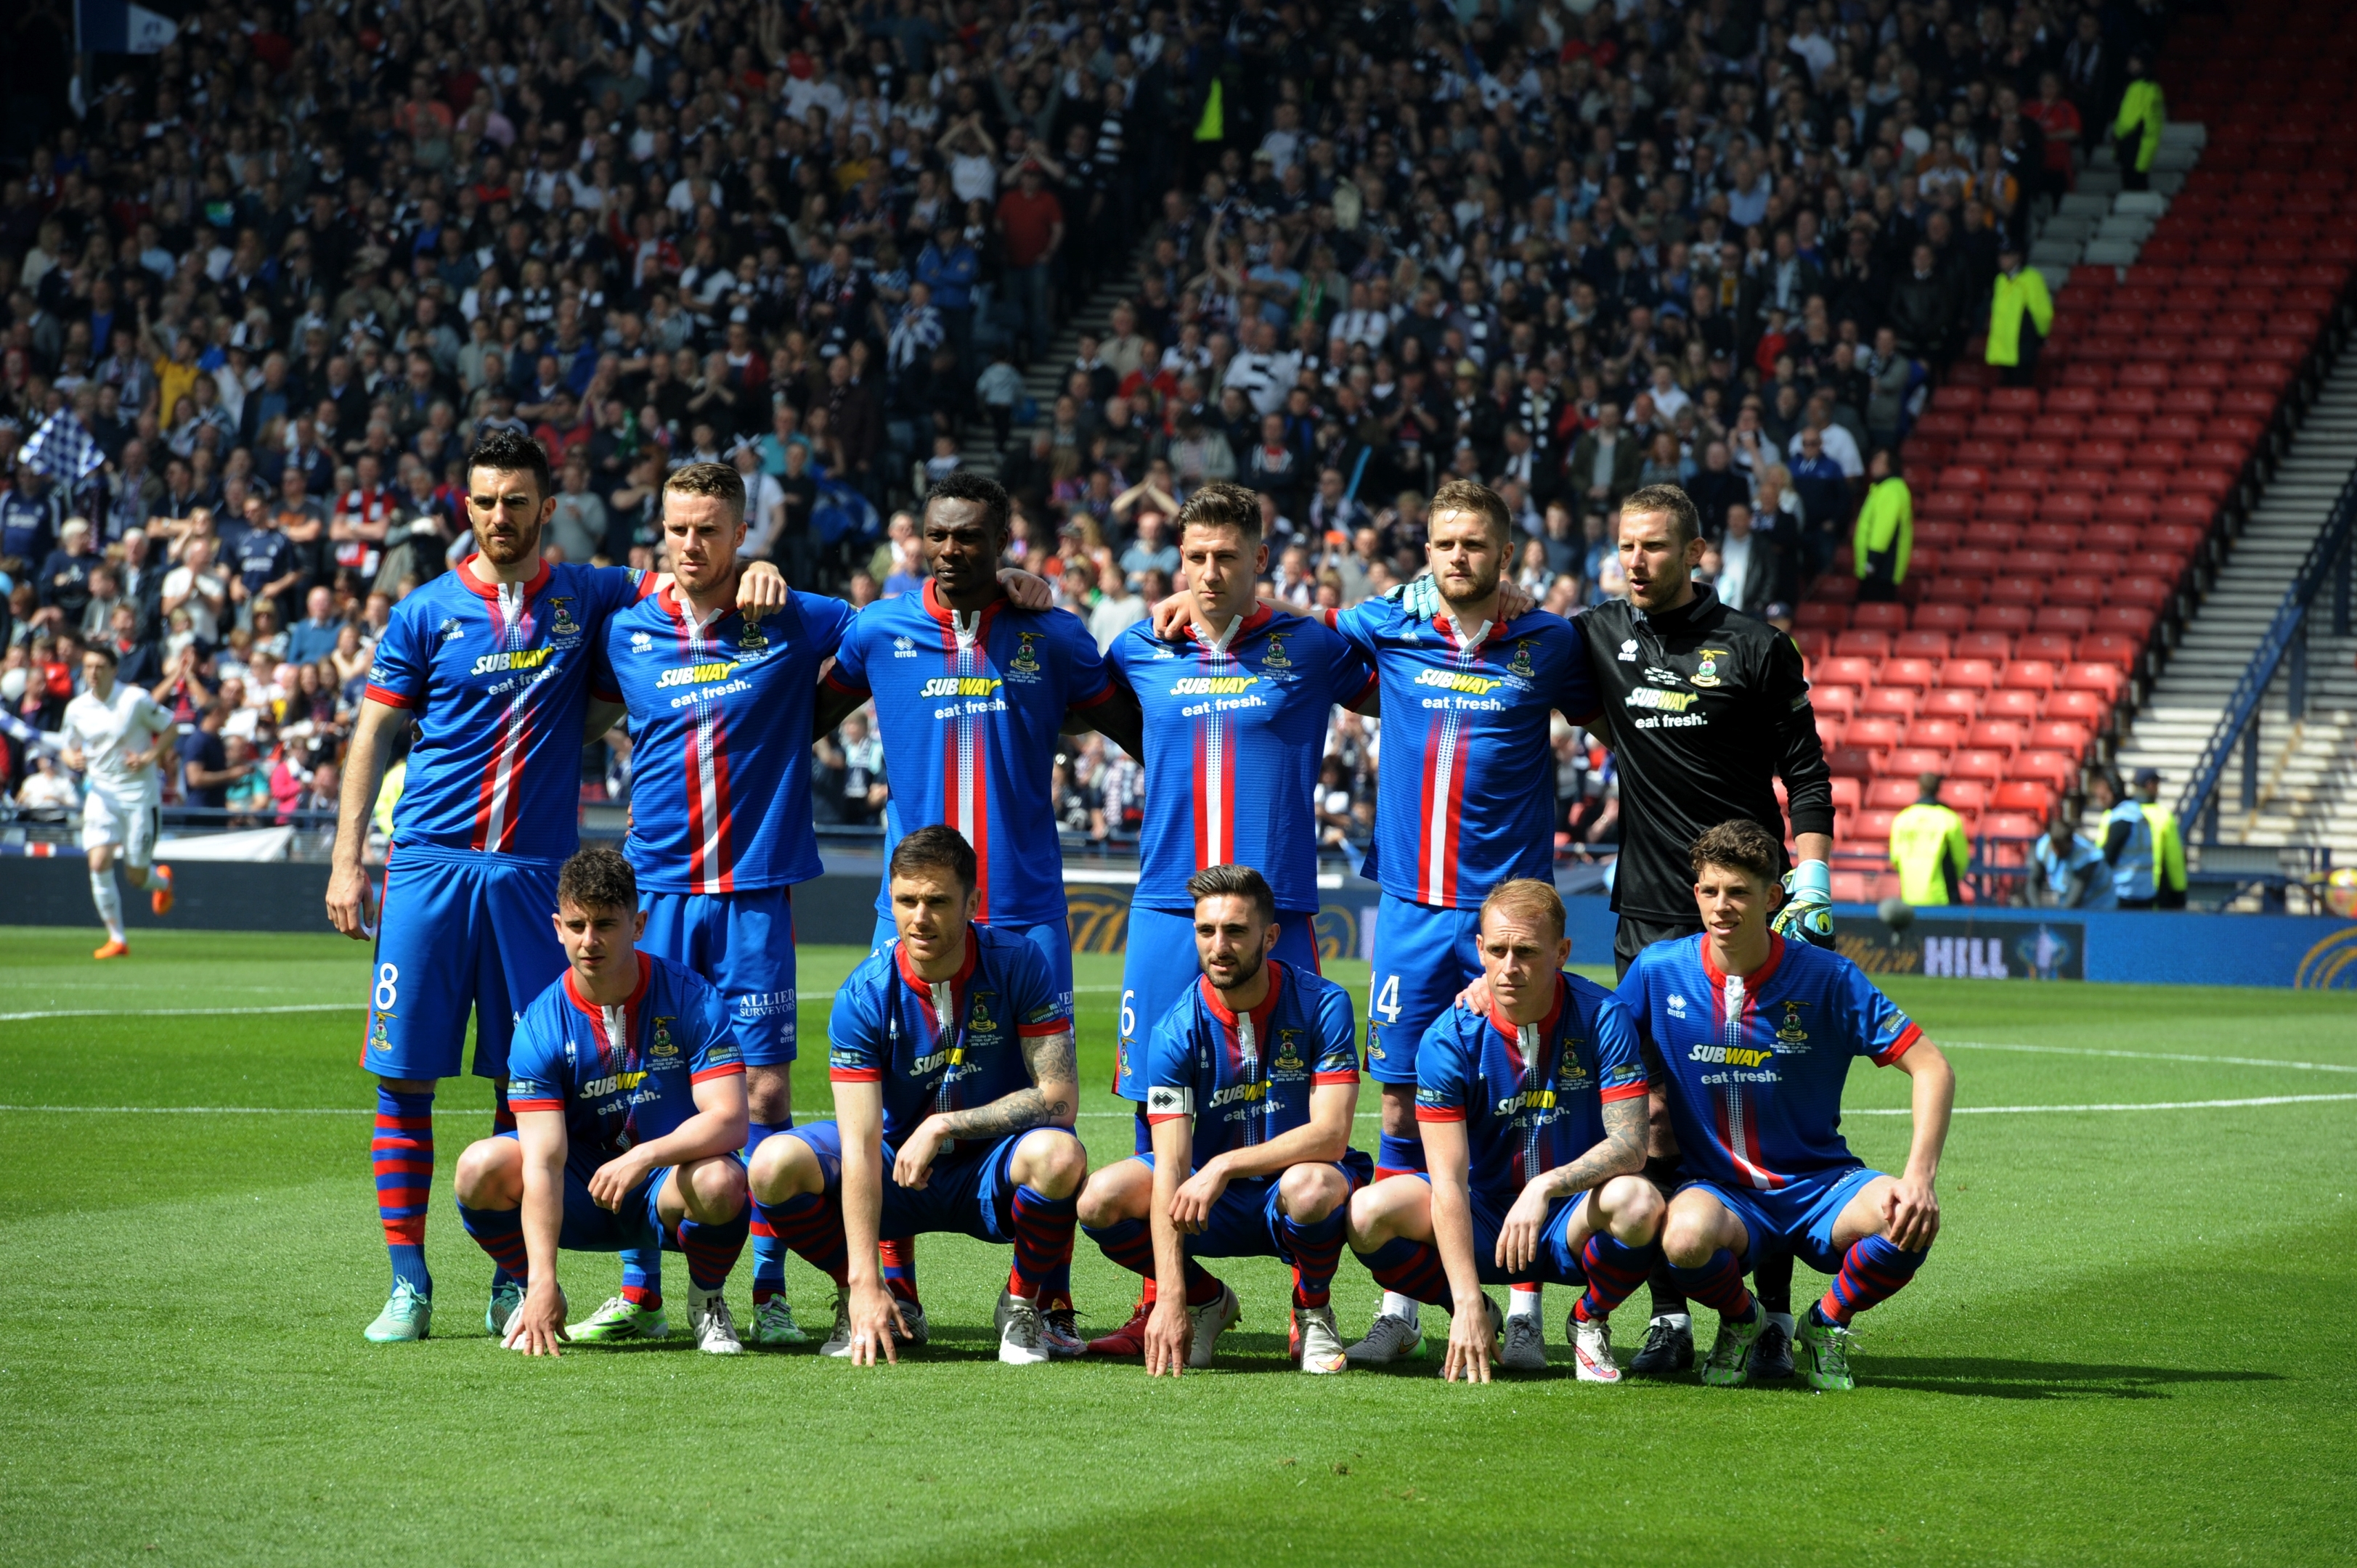 The Caley Thistle heroes line up ahead of the match. Picture by Kenny Elrick